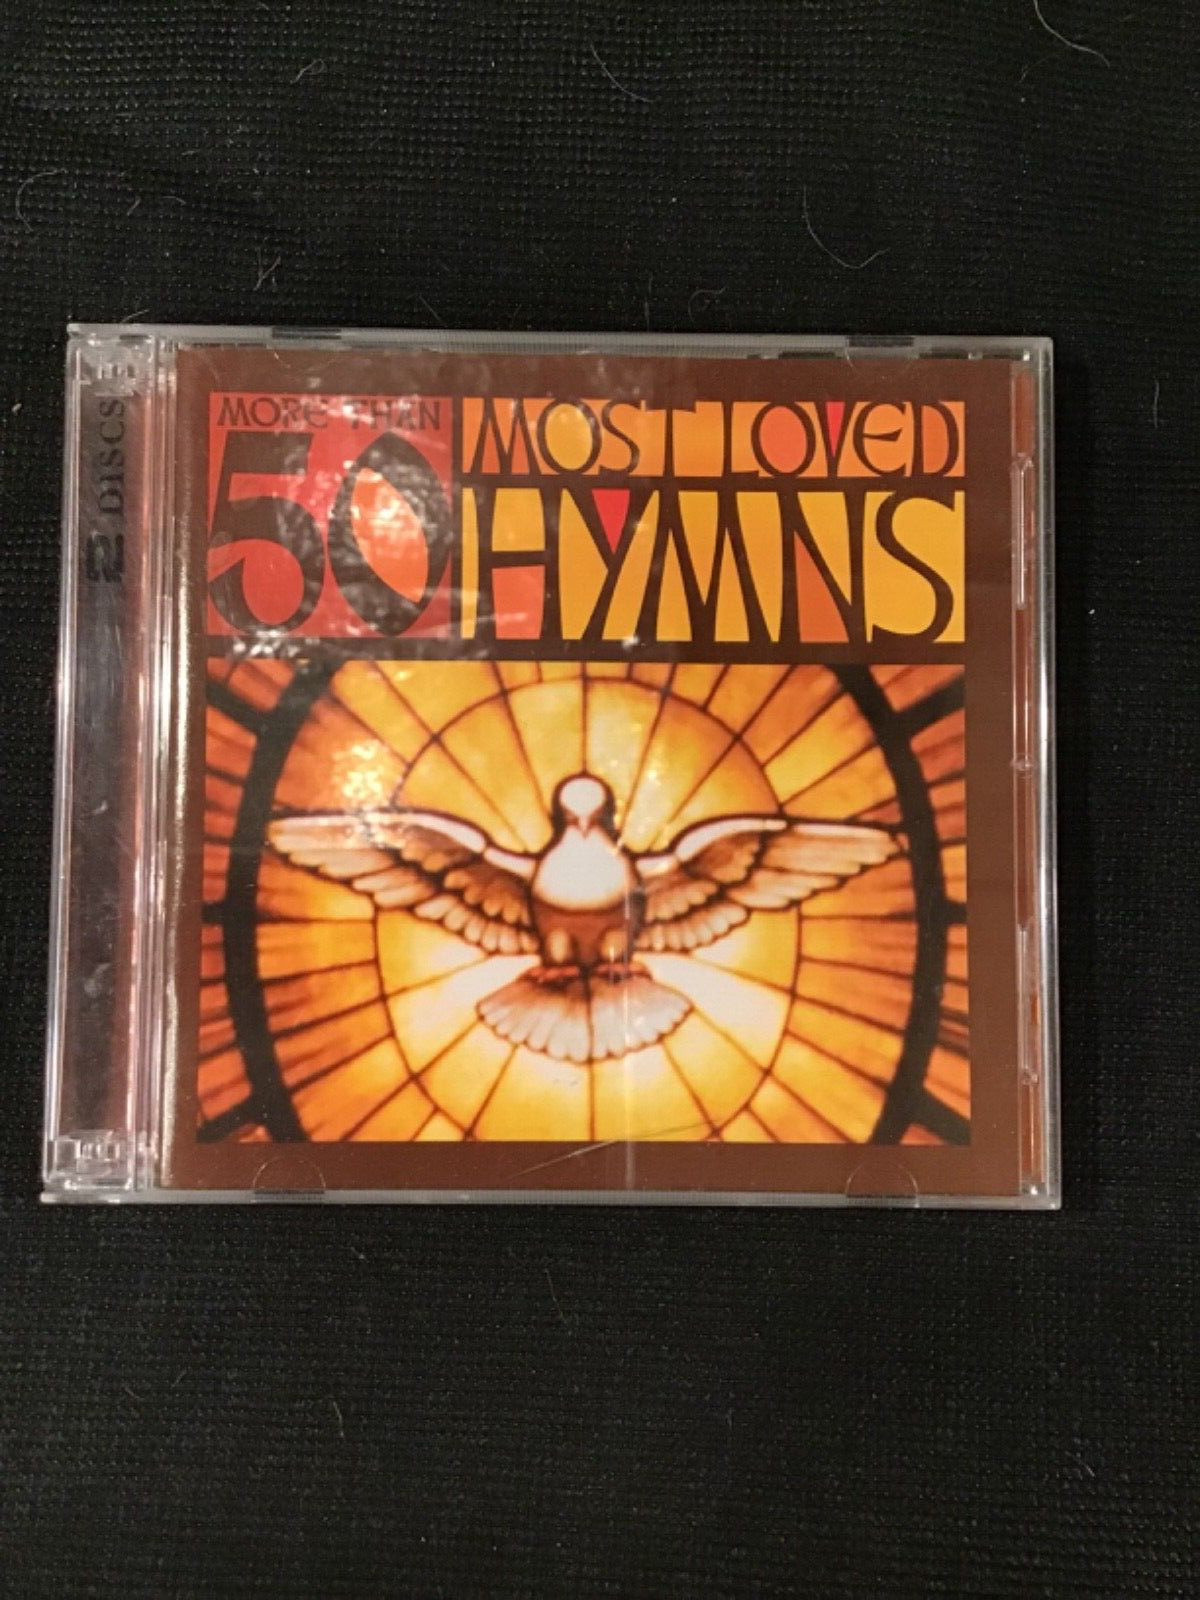 More Than 50 Most Loved Hymns - Audio CD By Various Artists - VERY GOOD